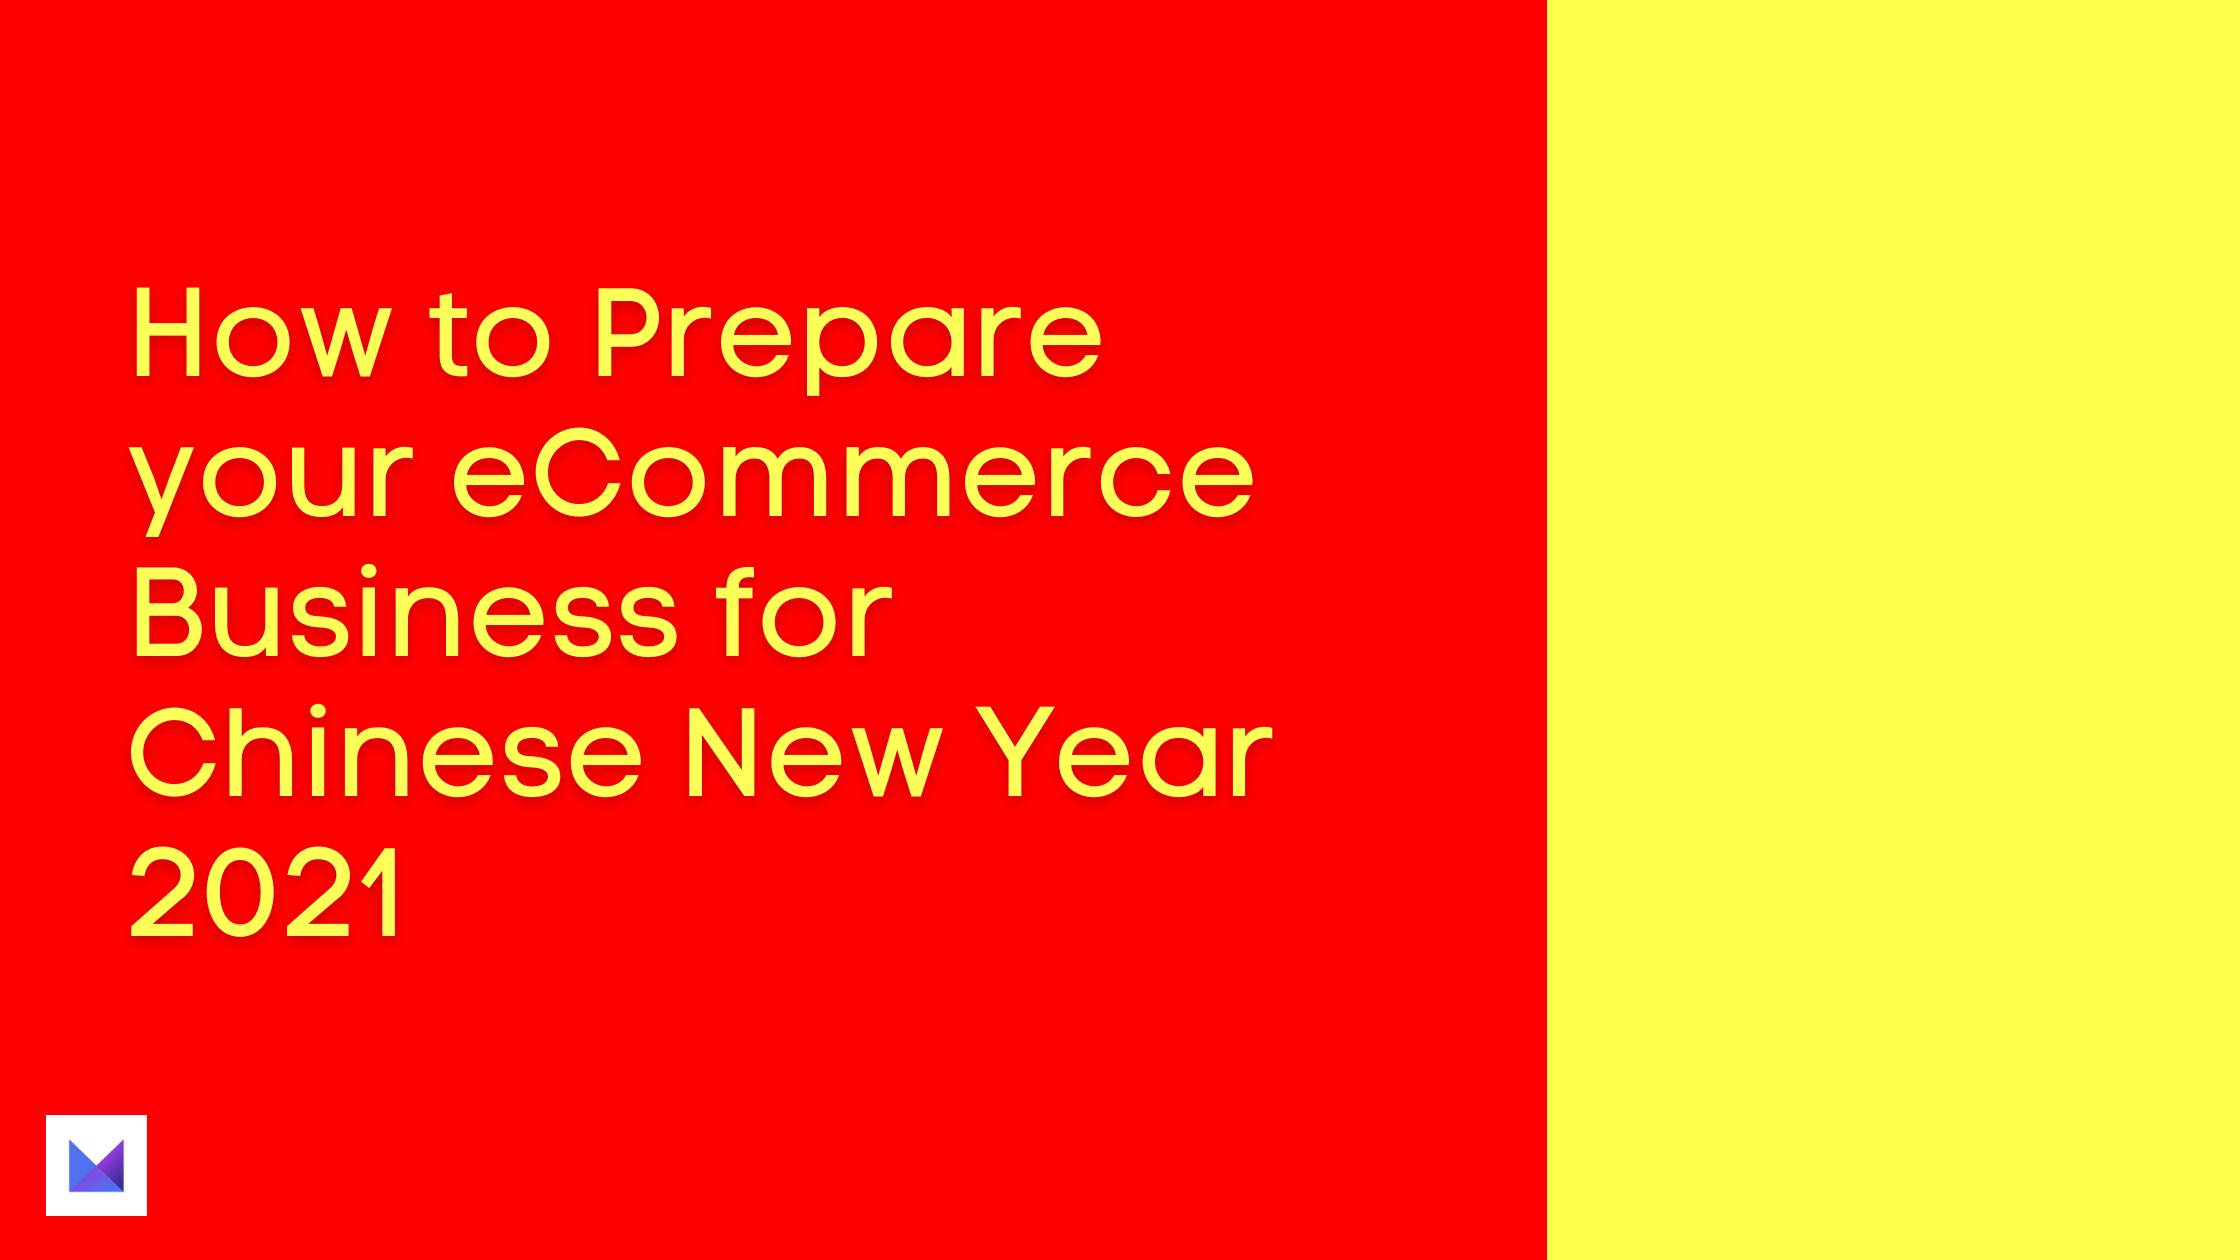 How to prepare your eCommerce Business for Chinese New Year